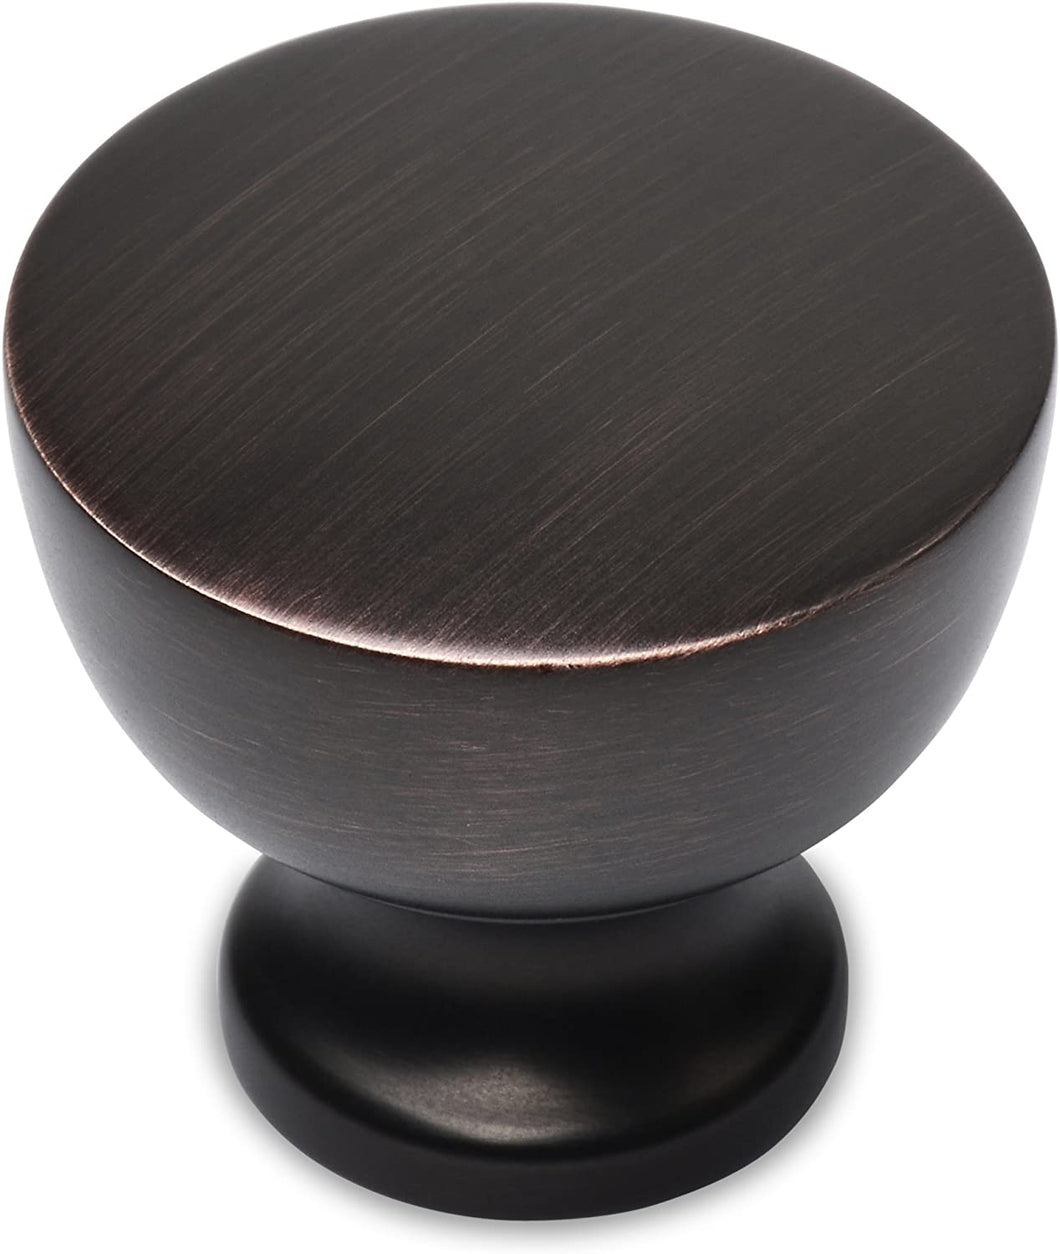 Oil Rubbed Bronze Cabinet Knobs - SHKM013-ORB-5